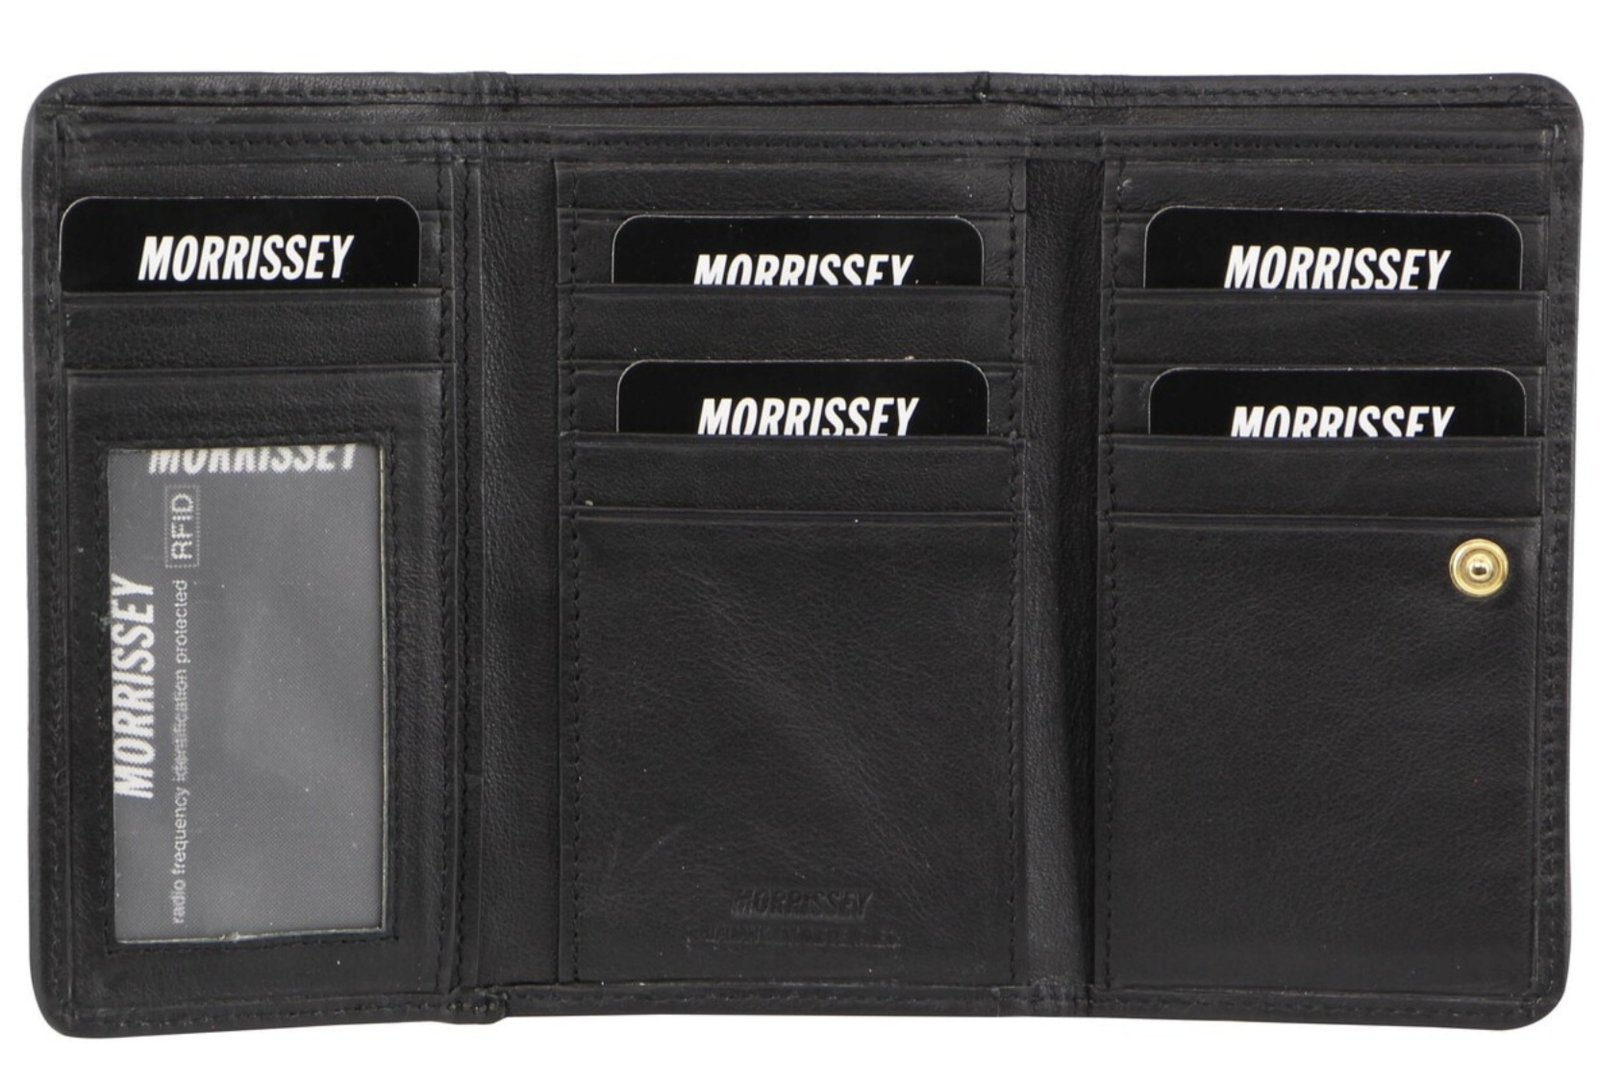 Morrissey Womens Card Holder Leather Wallet Coin Clutch Purse Organizer Cute Girl Ladies - Navy - SILBERSHELL